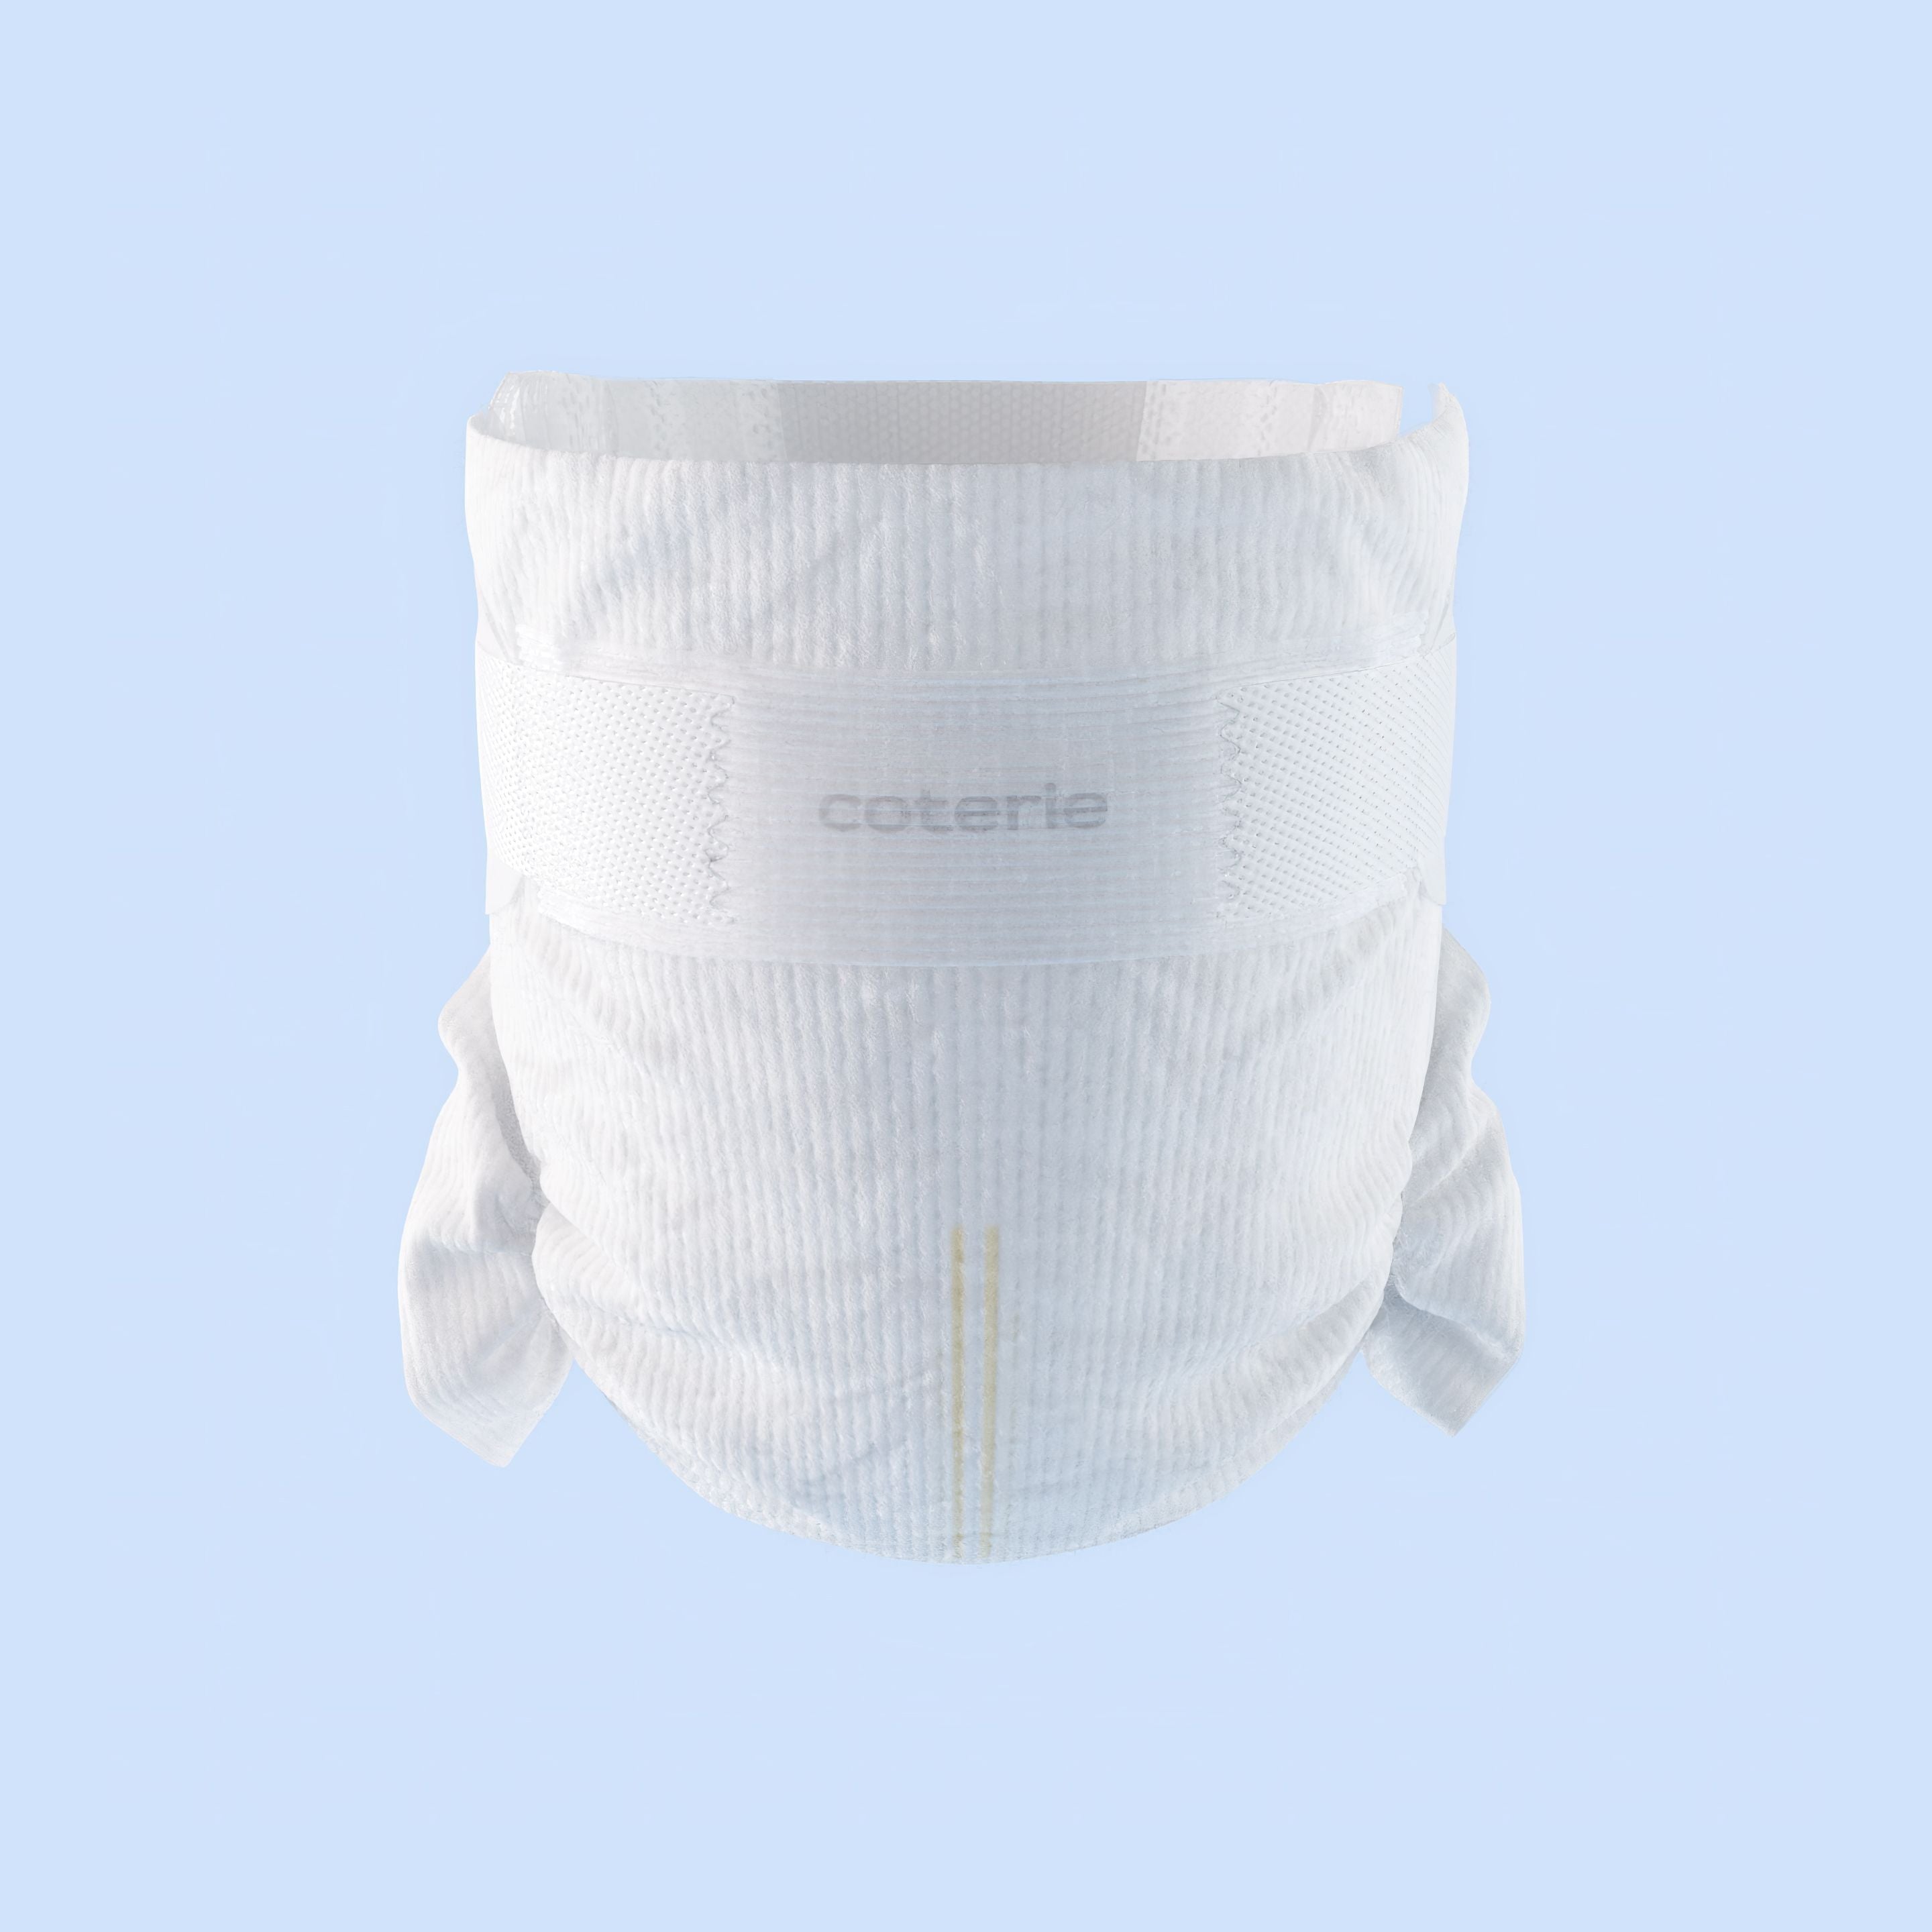 Coterie Diapers, Pricing, Cost, Reviews